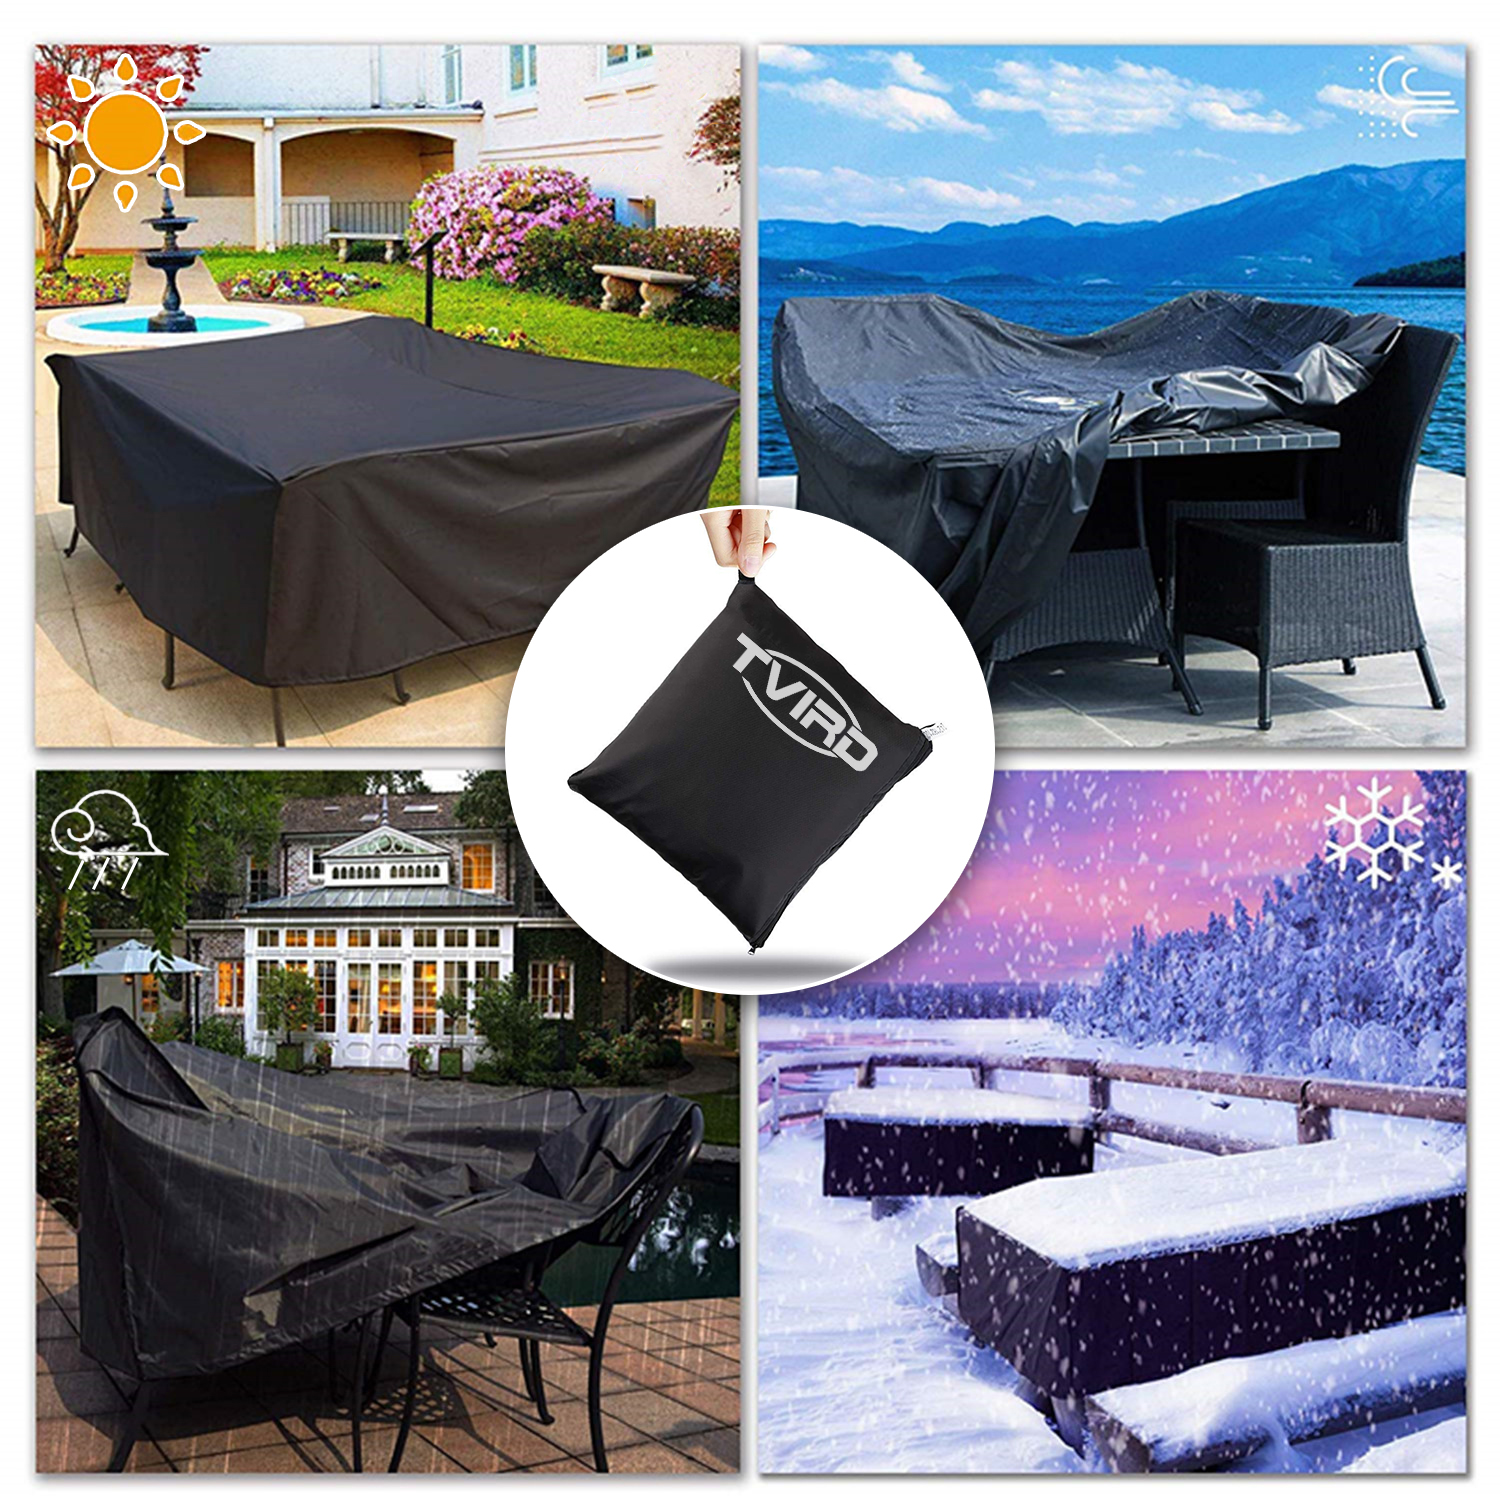 Tvird-242x162x100cm-Patio-Garden-Outdoor-Furniture-Set-Protector-Cover-Table-Chair-Waterproof-Cover-1661472-5